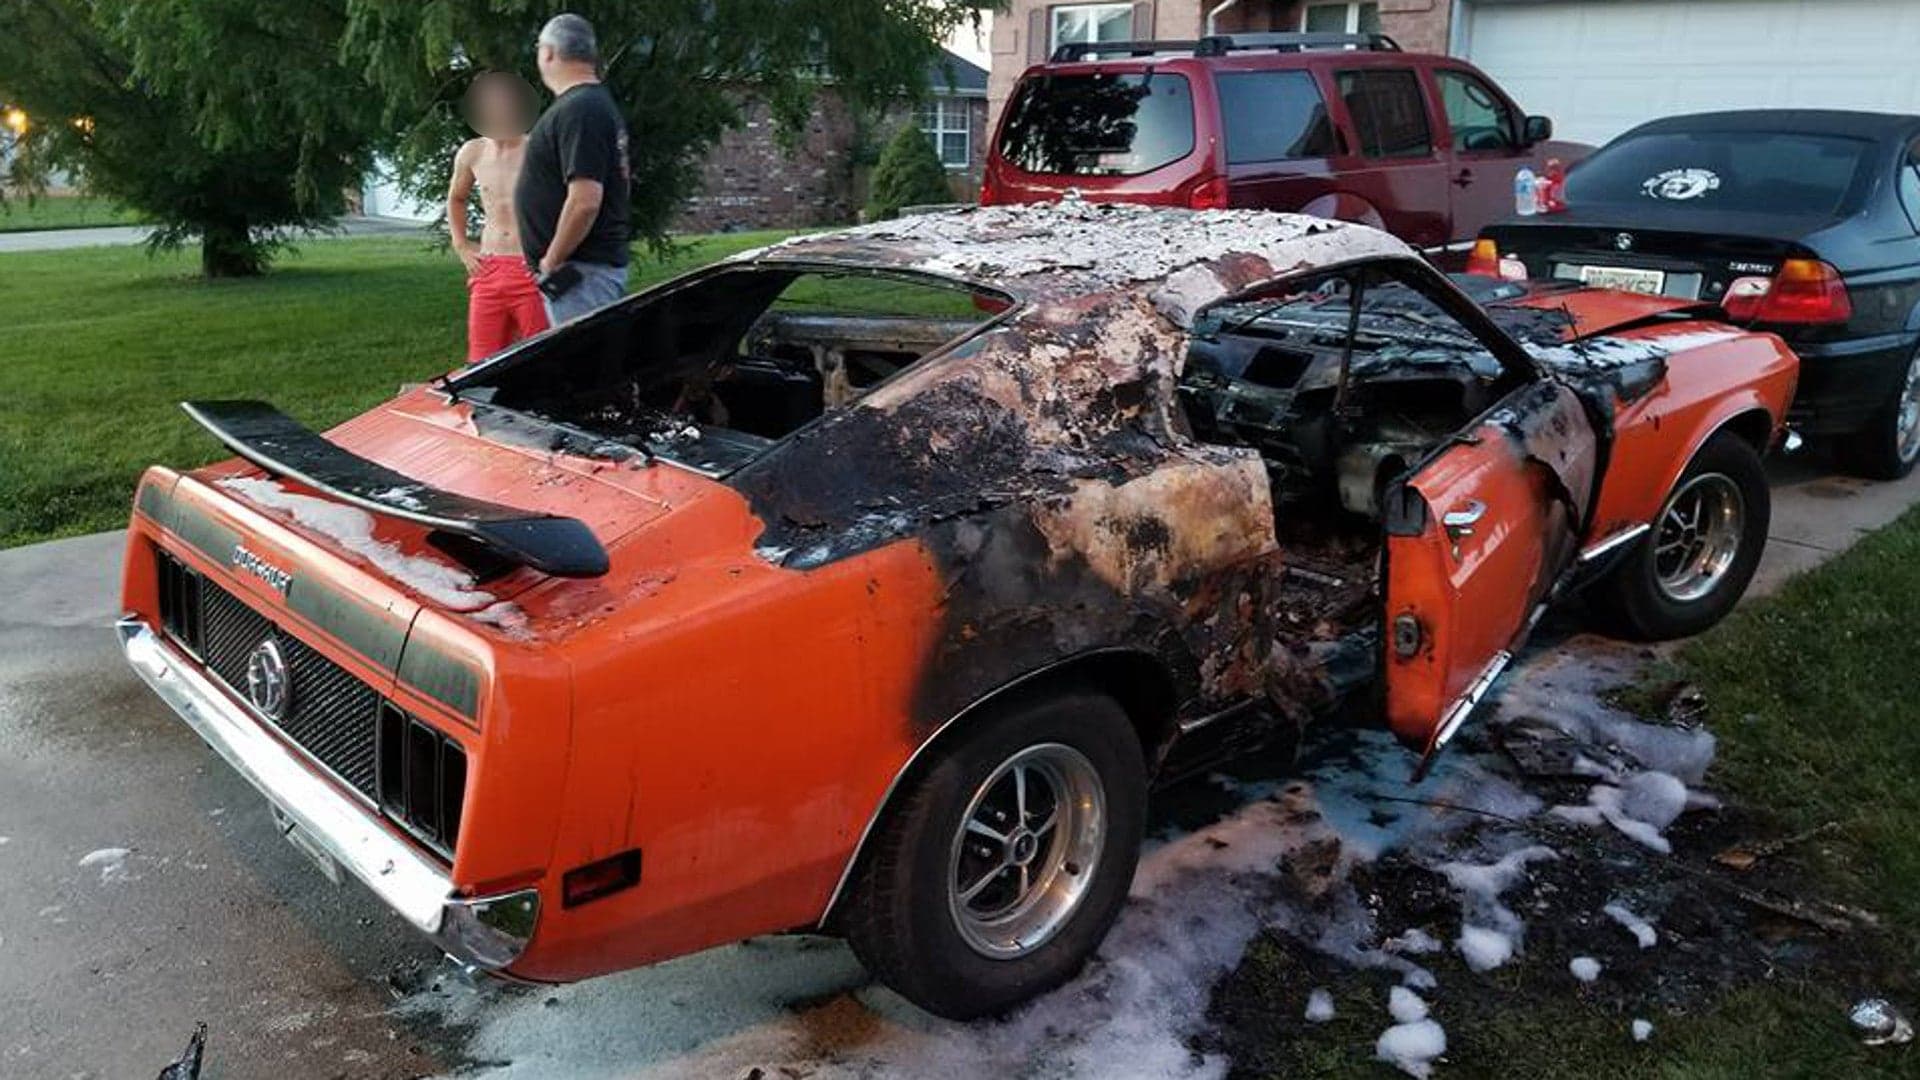 Vandal Torches 1970 Ford Mustang Mach 1 Owned by Disabled Child